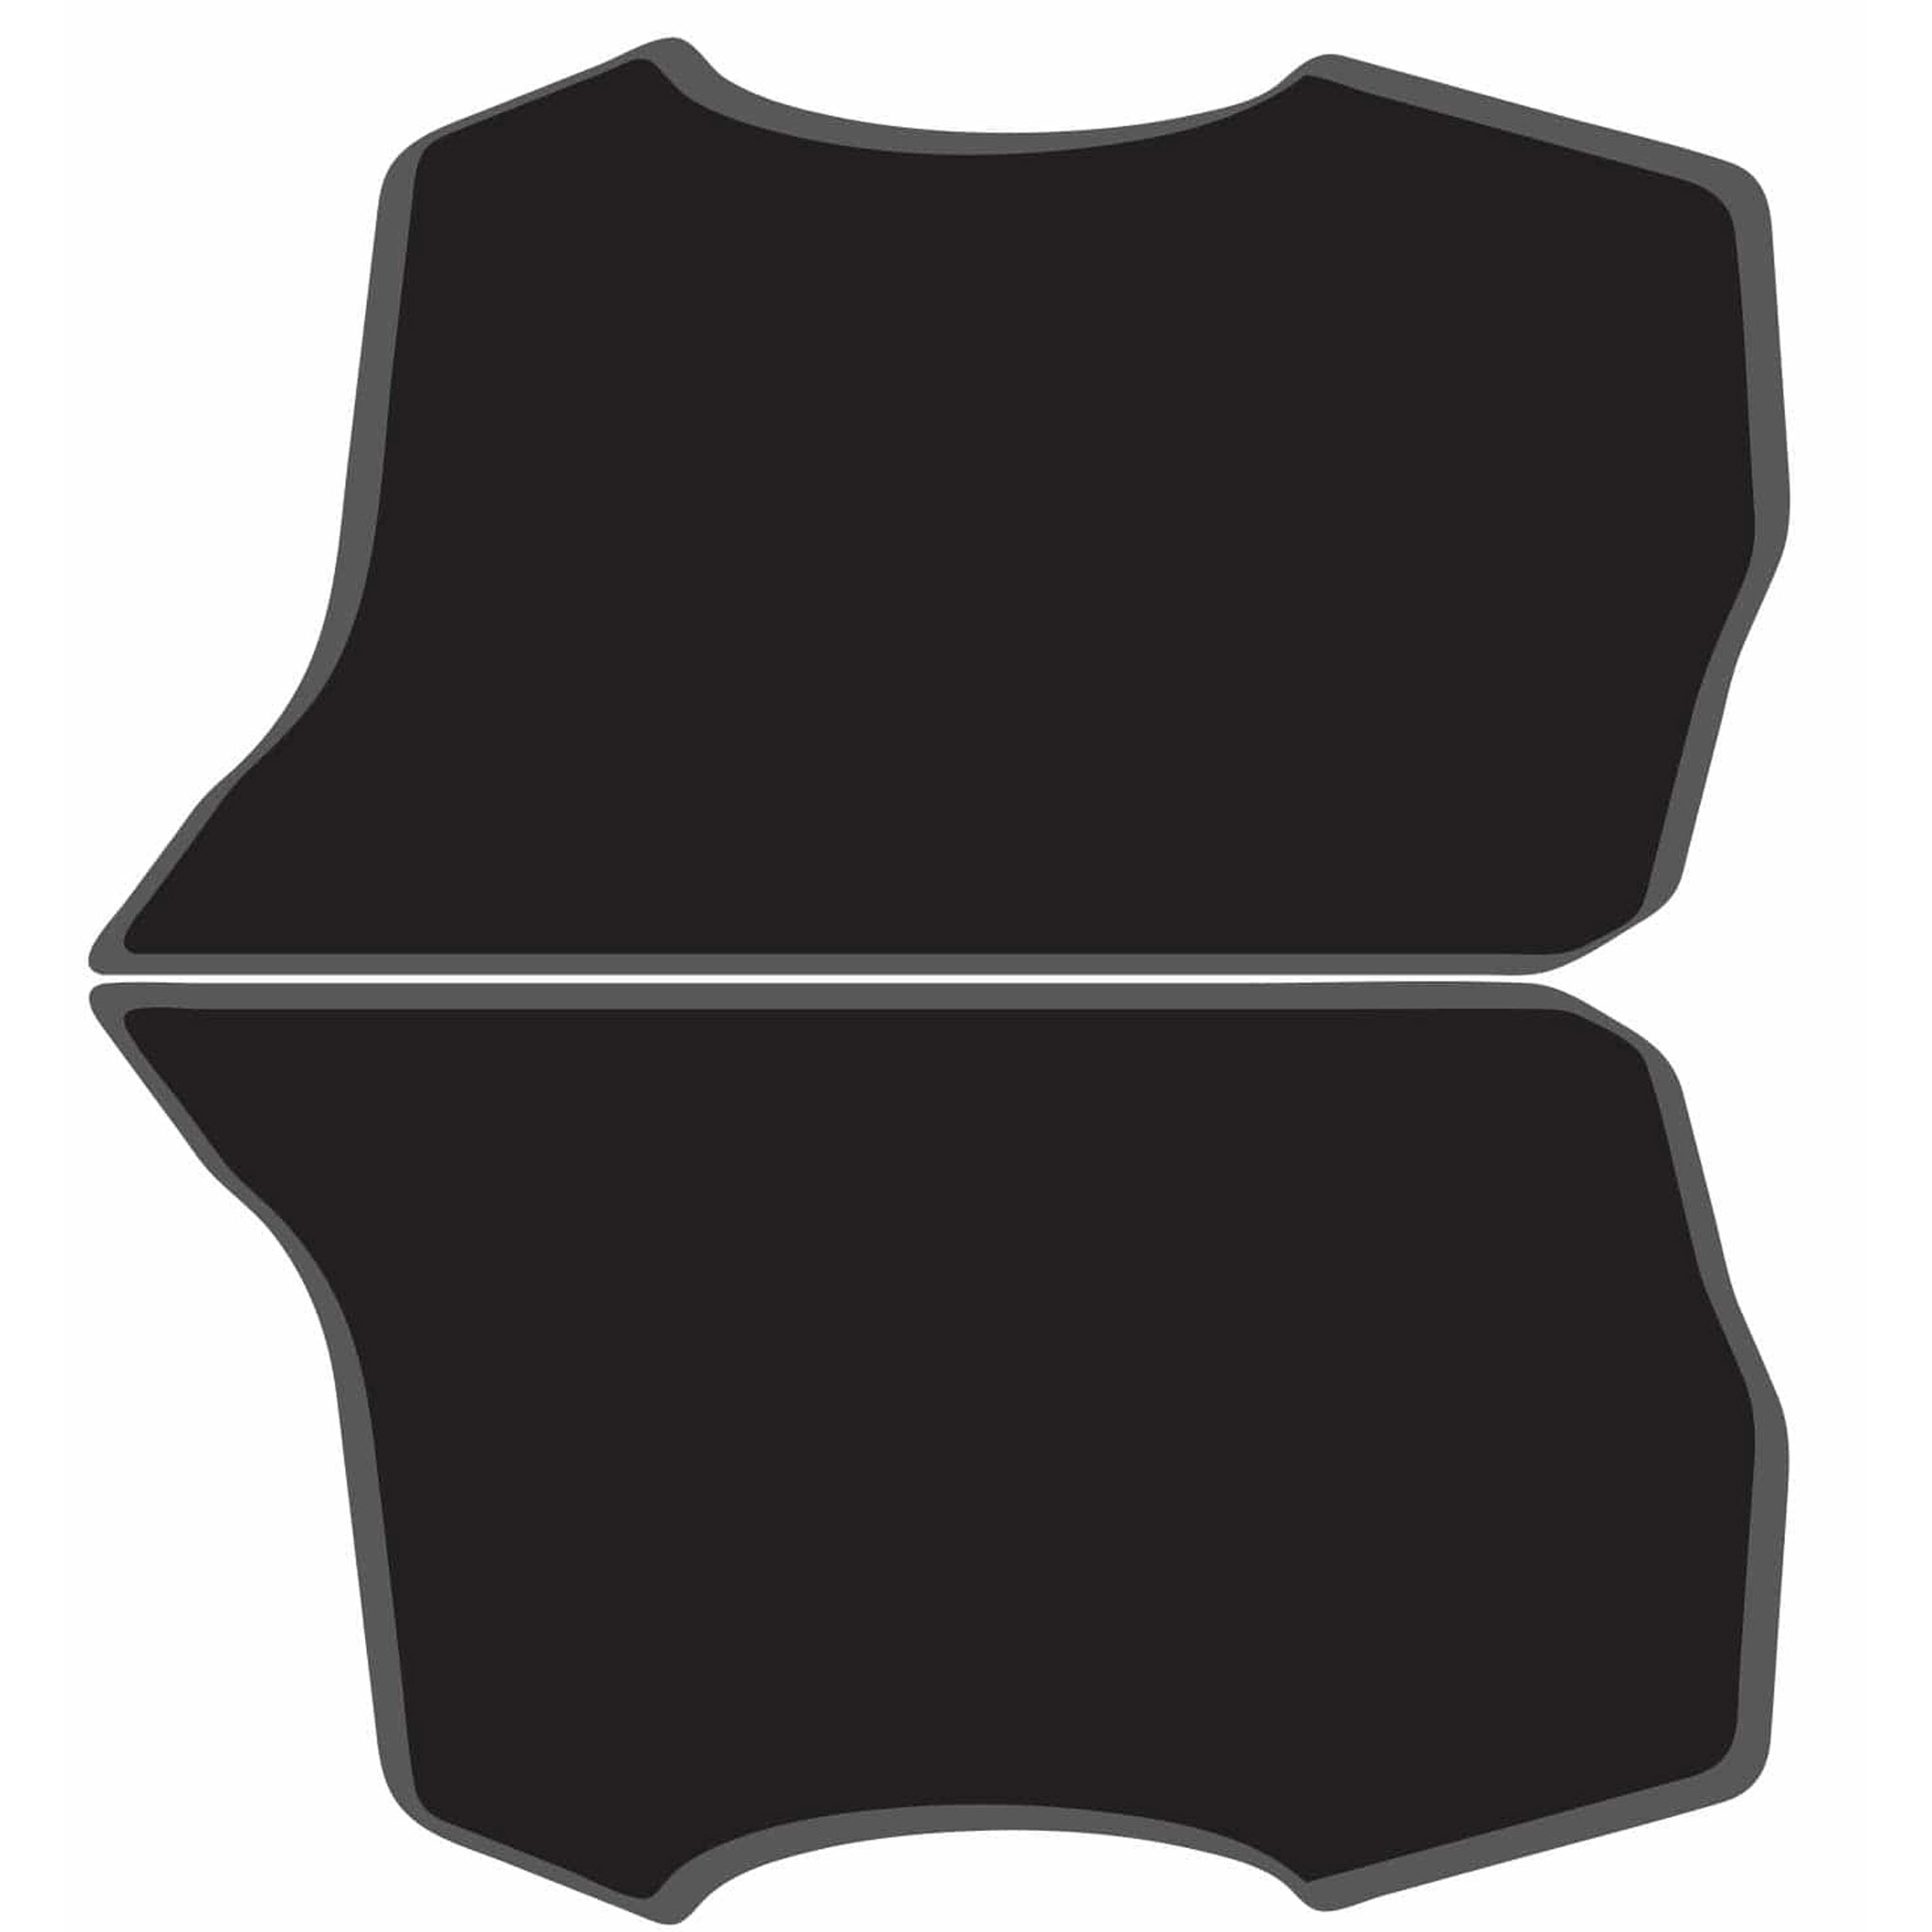 AnswerBMX 3D Number Plate, Side, Black